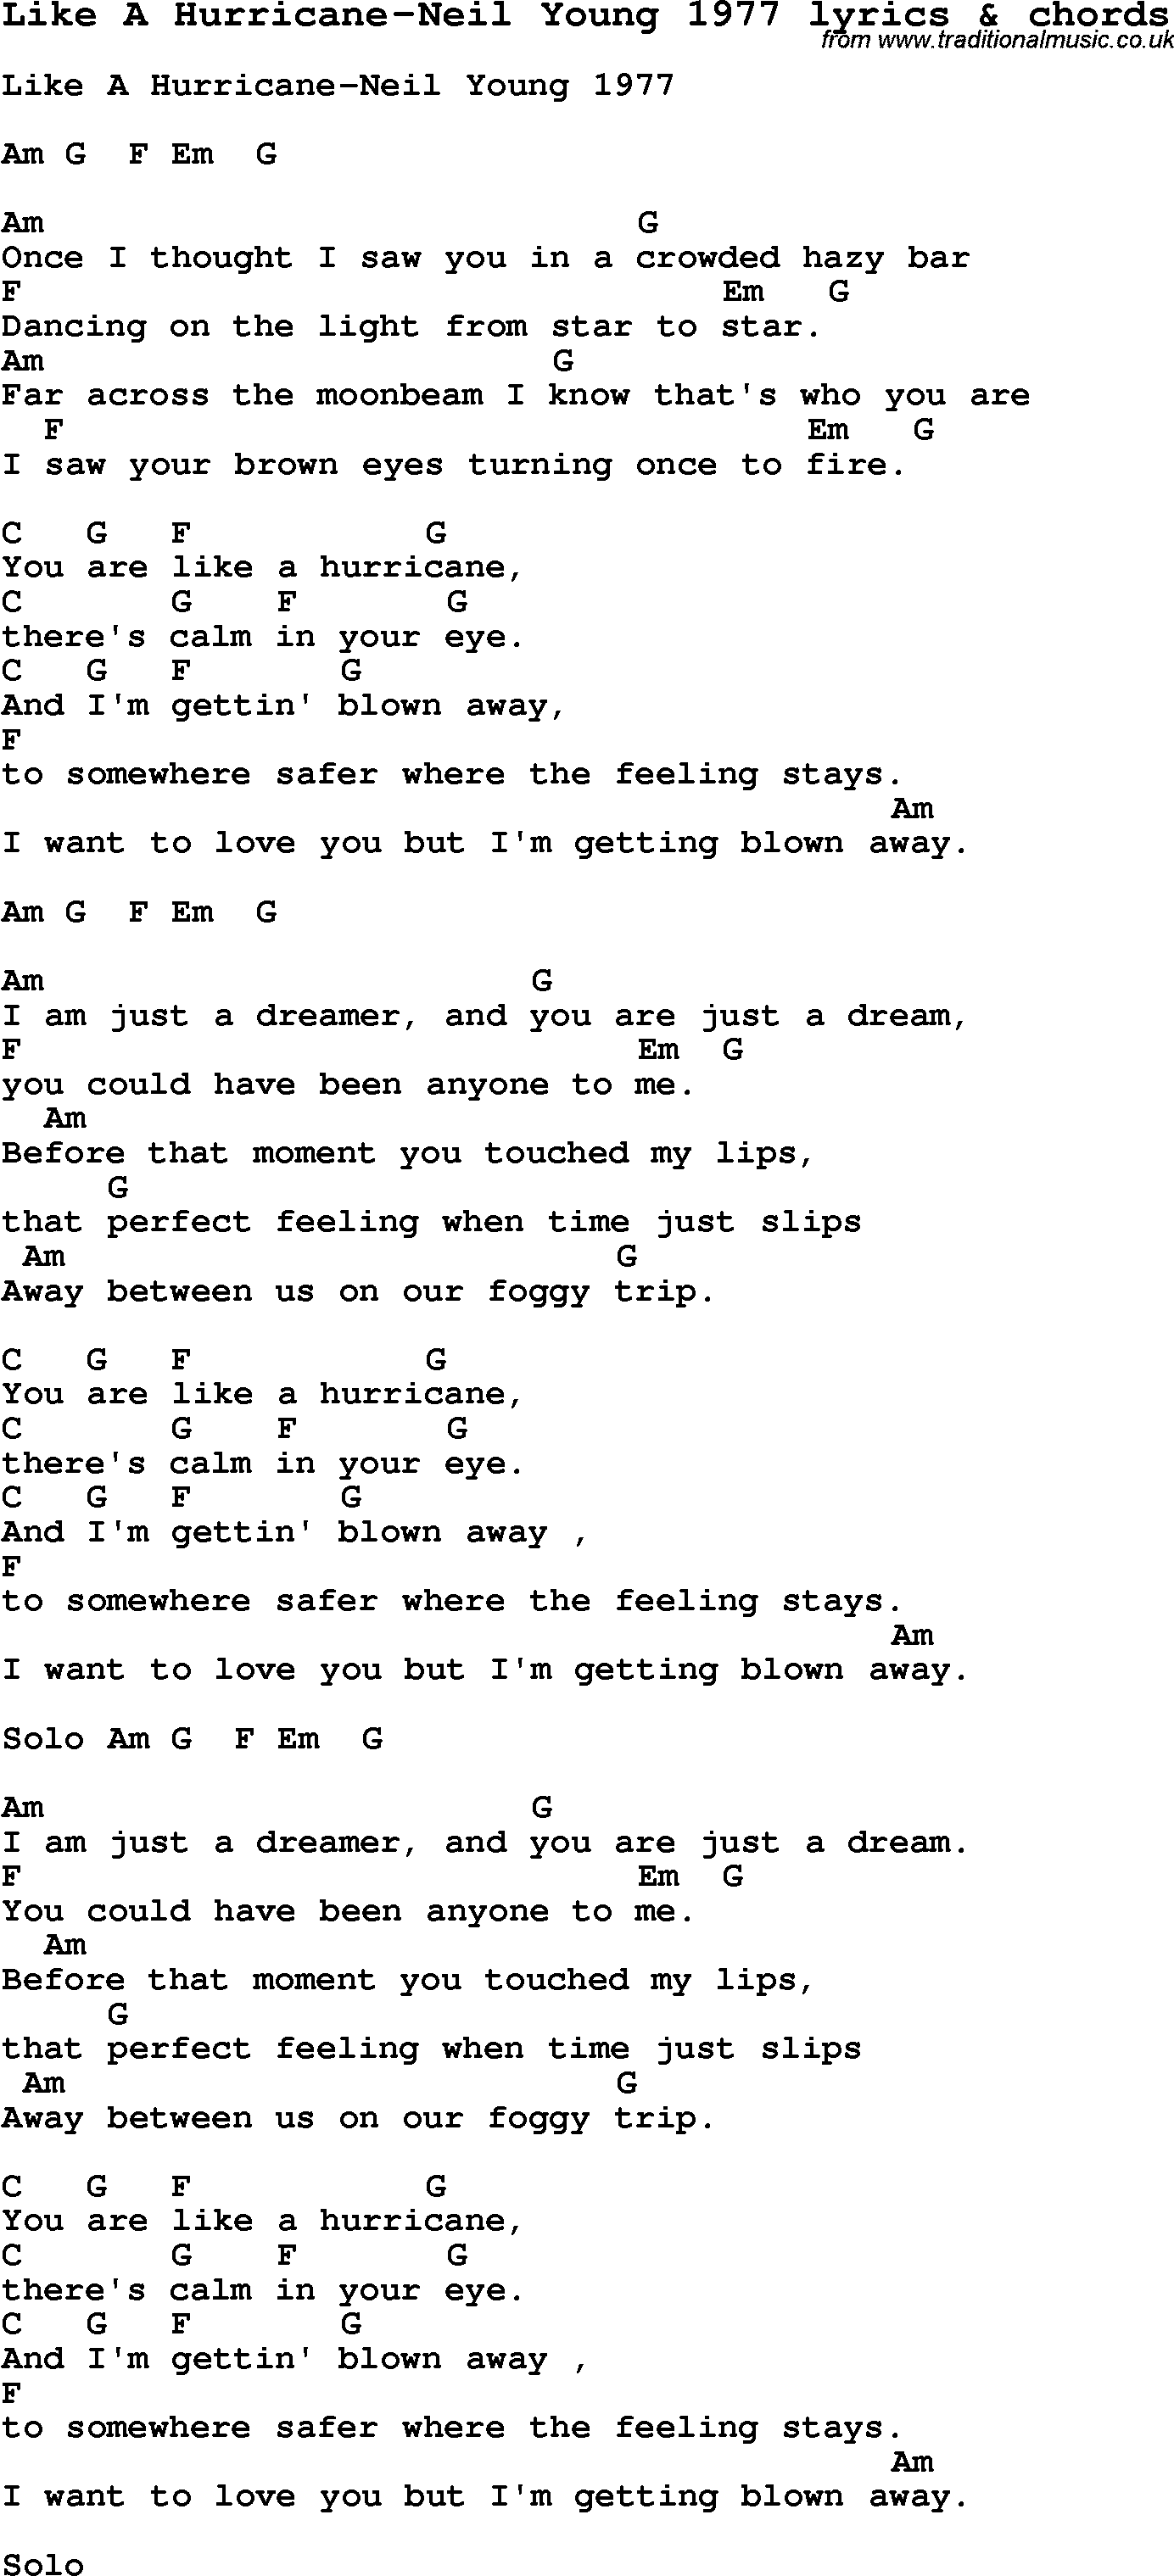 Love Song Lyrics for: Like A Hurricane-Neil Young 1977 with chords for Ukulele, Guitar Banjo etc.